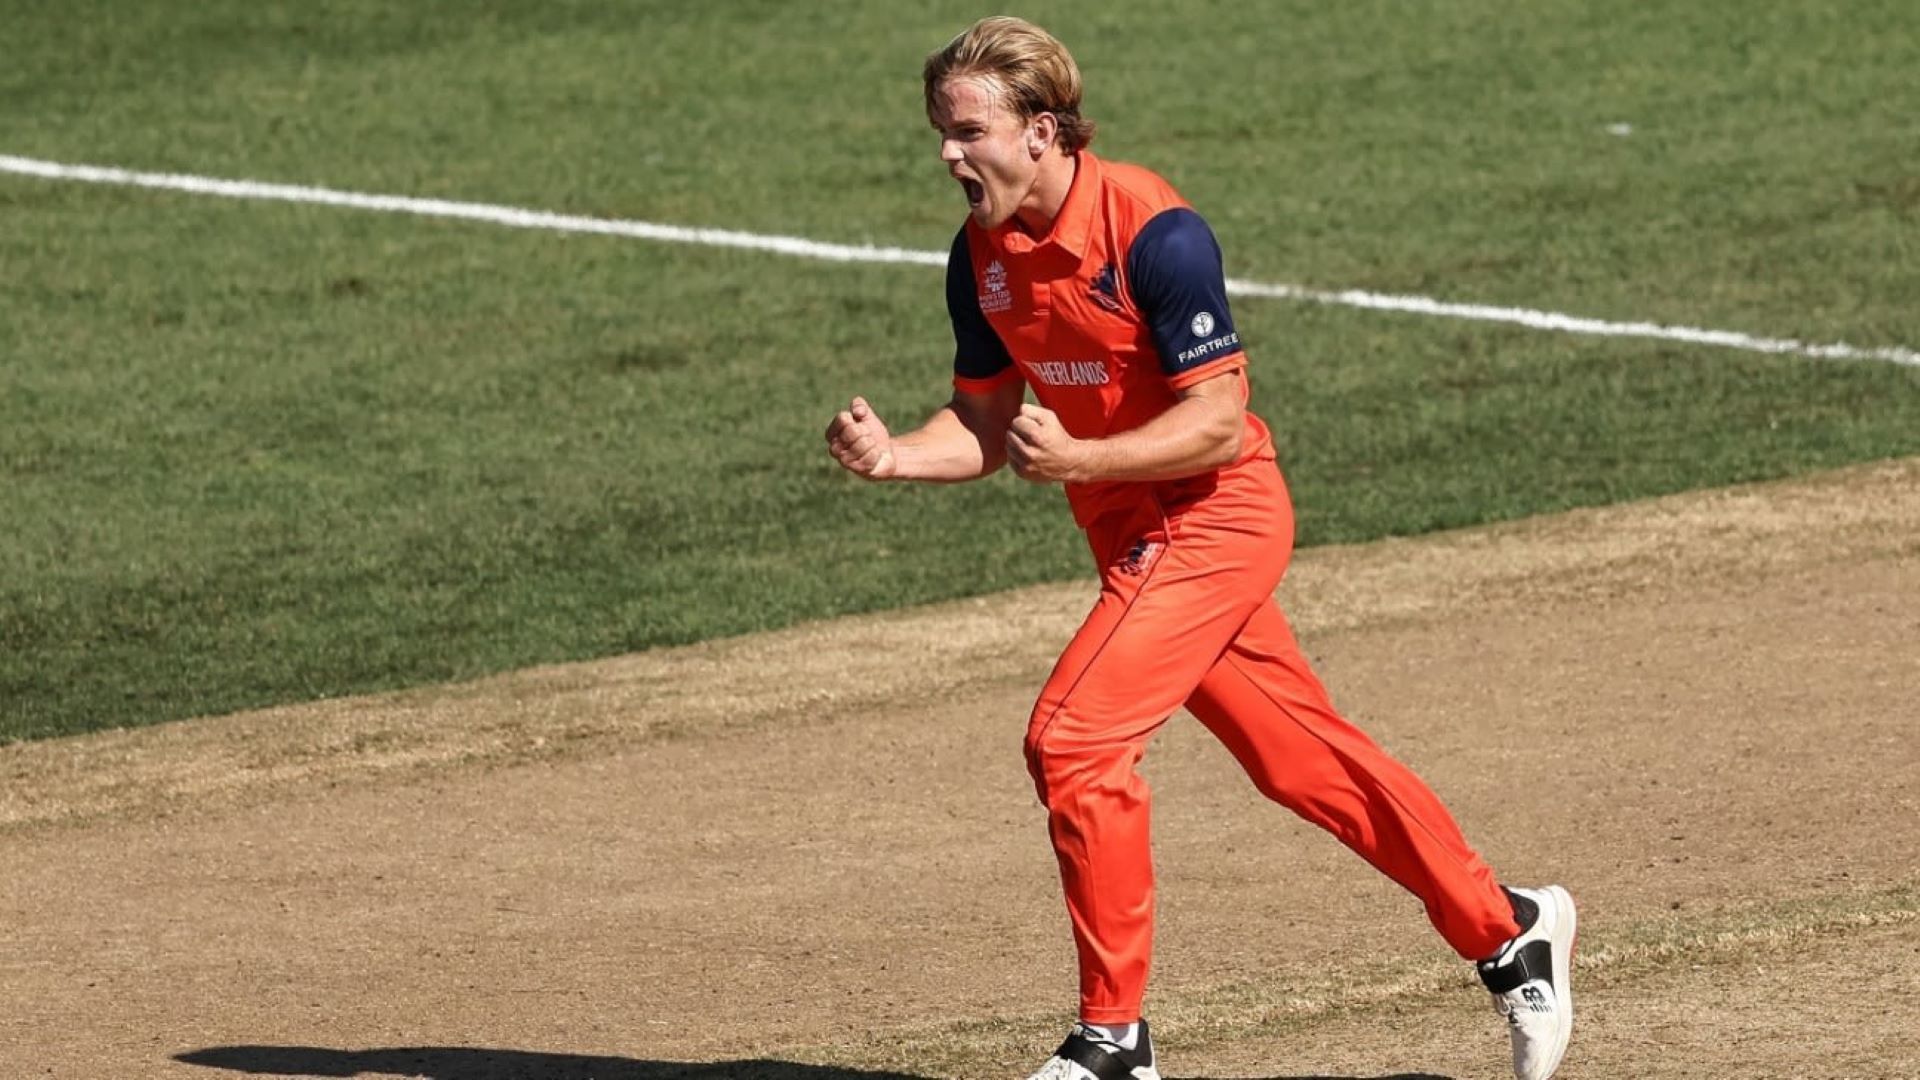 Bas de Leede starred with ball and bat to power the Dutch to the World Cup.